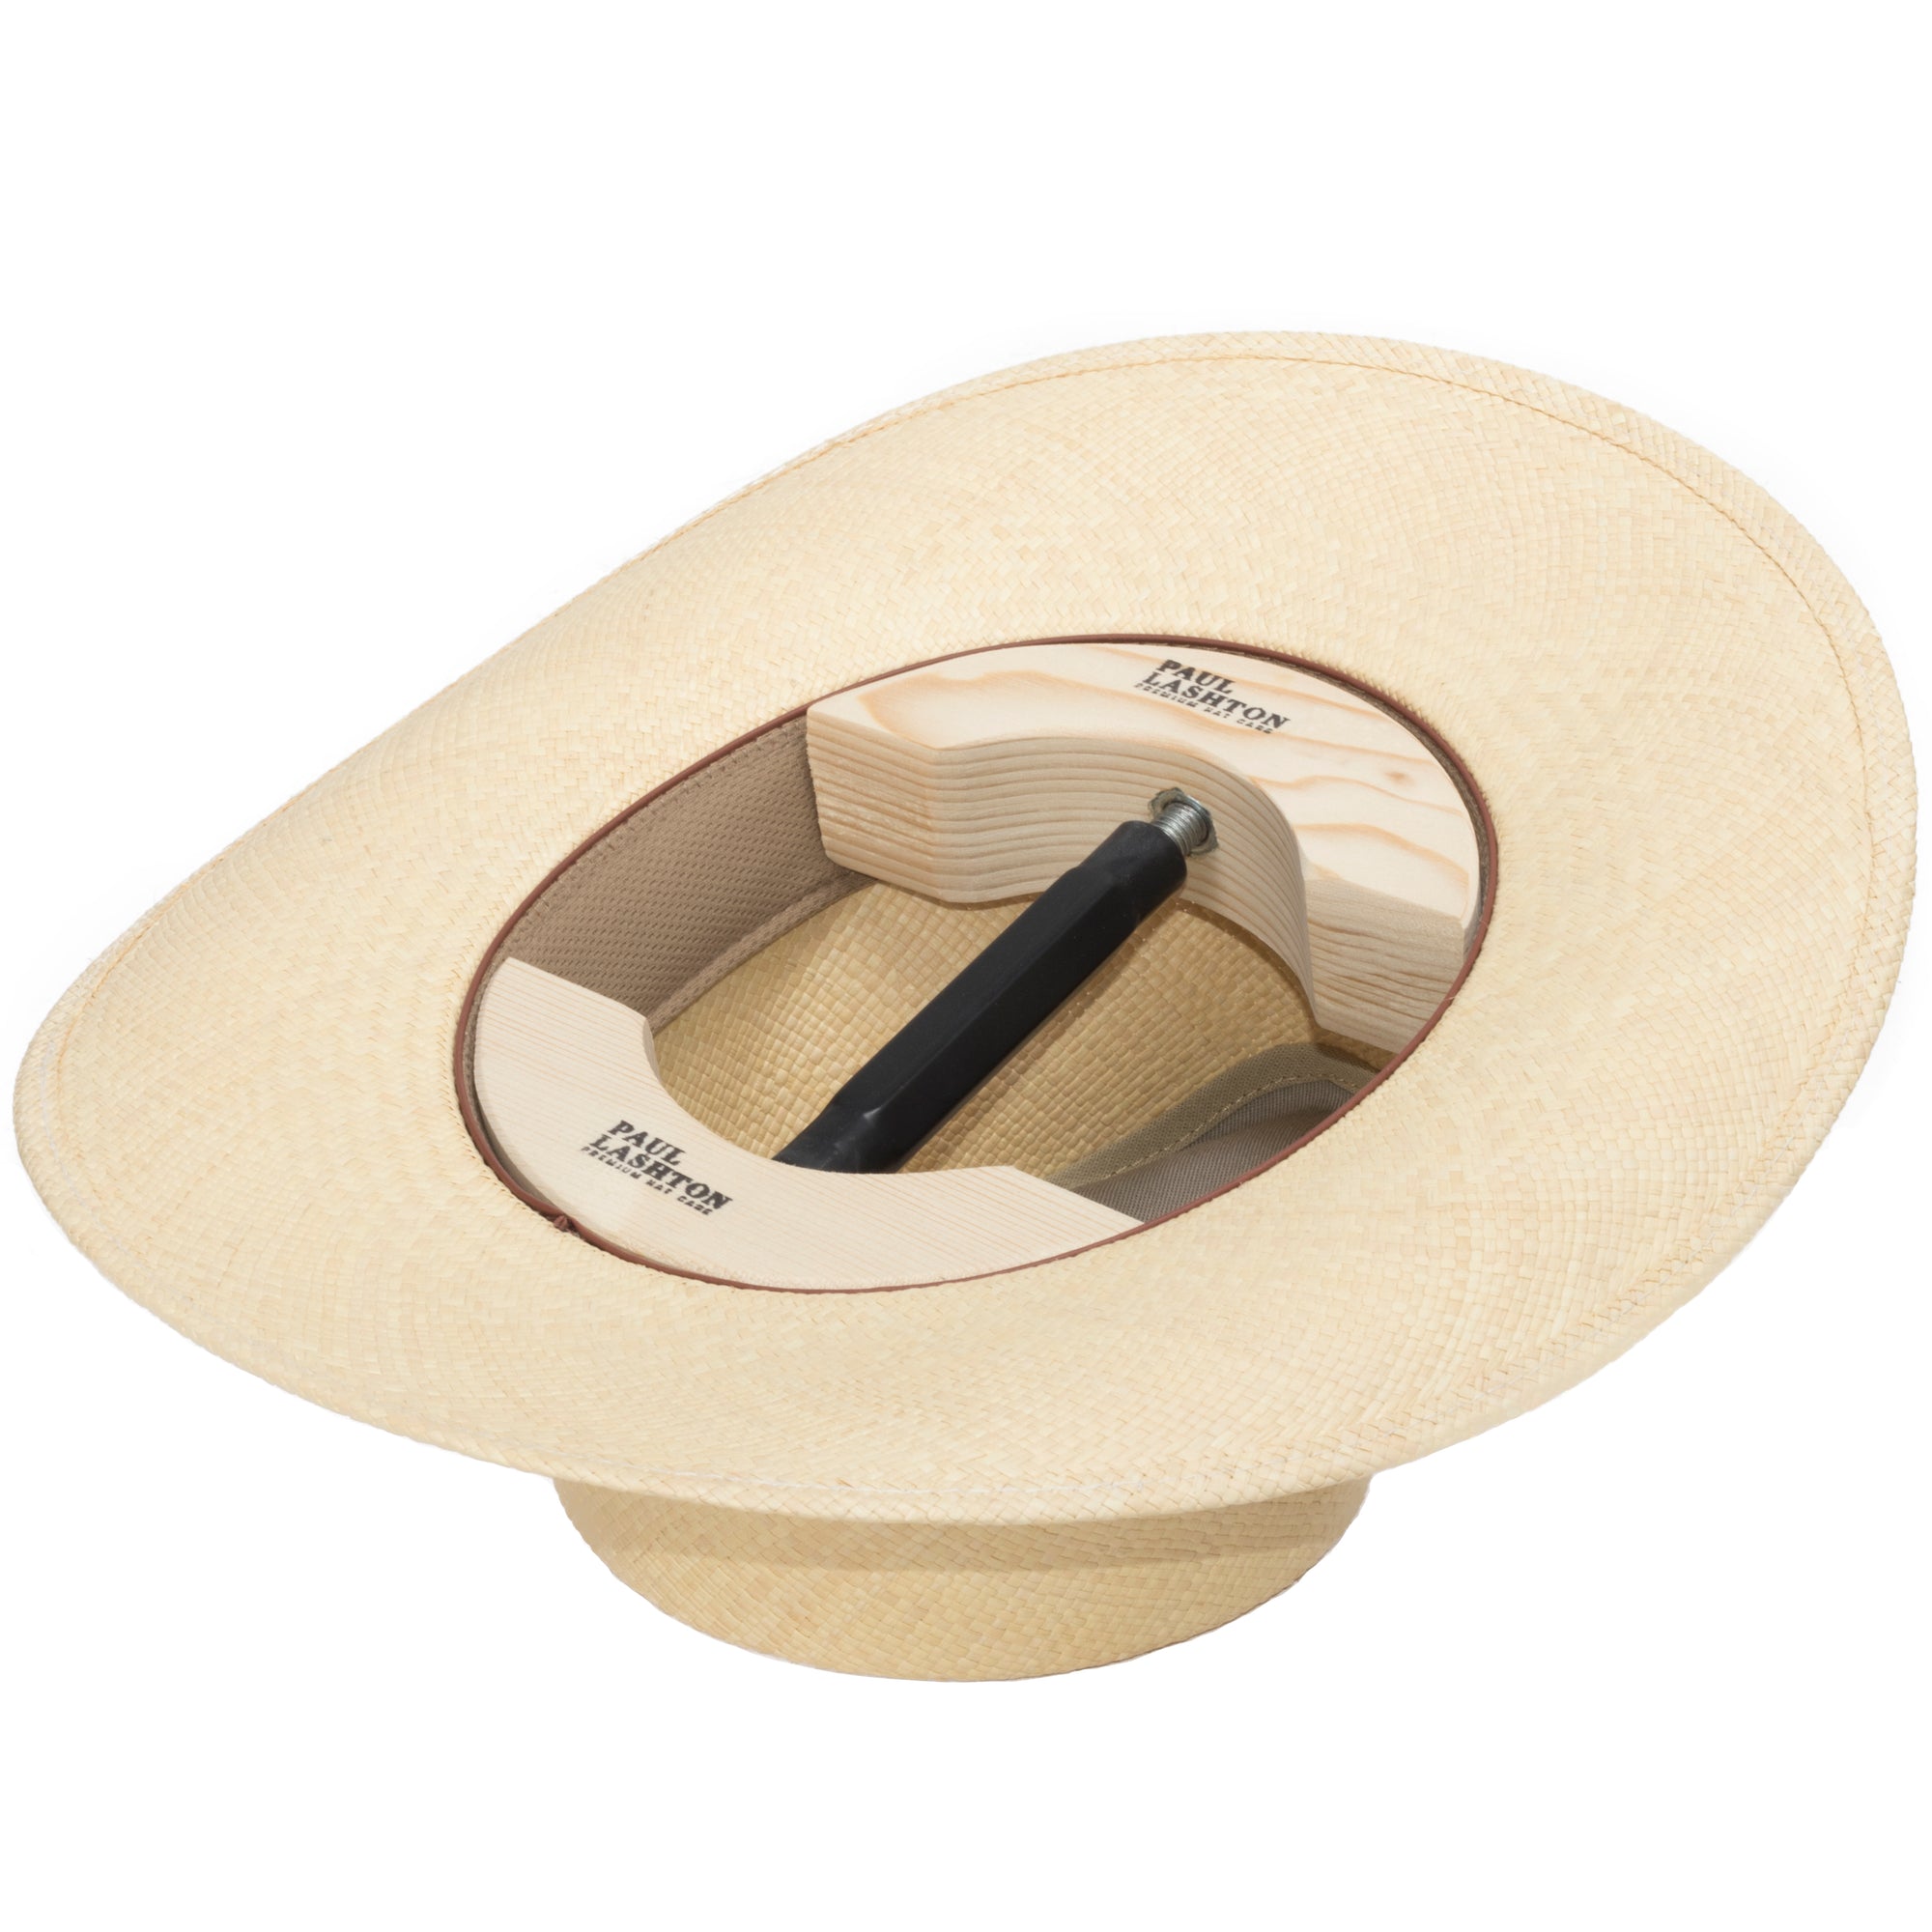 HAIBEIR Hat Stretcher for Fitted Hats Adjustable to All Hats Two Sizes  Cowboy Hat Stretcher for Felt Hats Beseball Caps